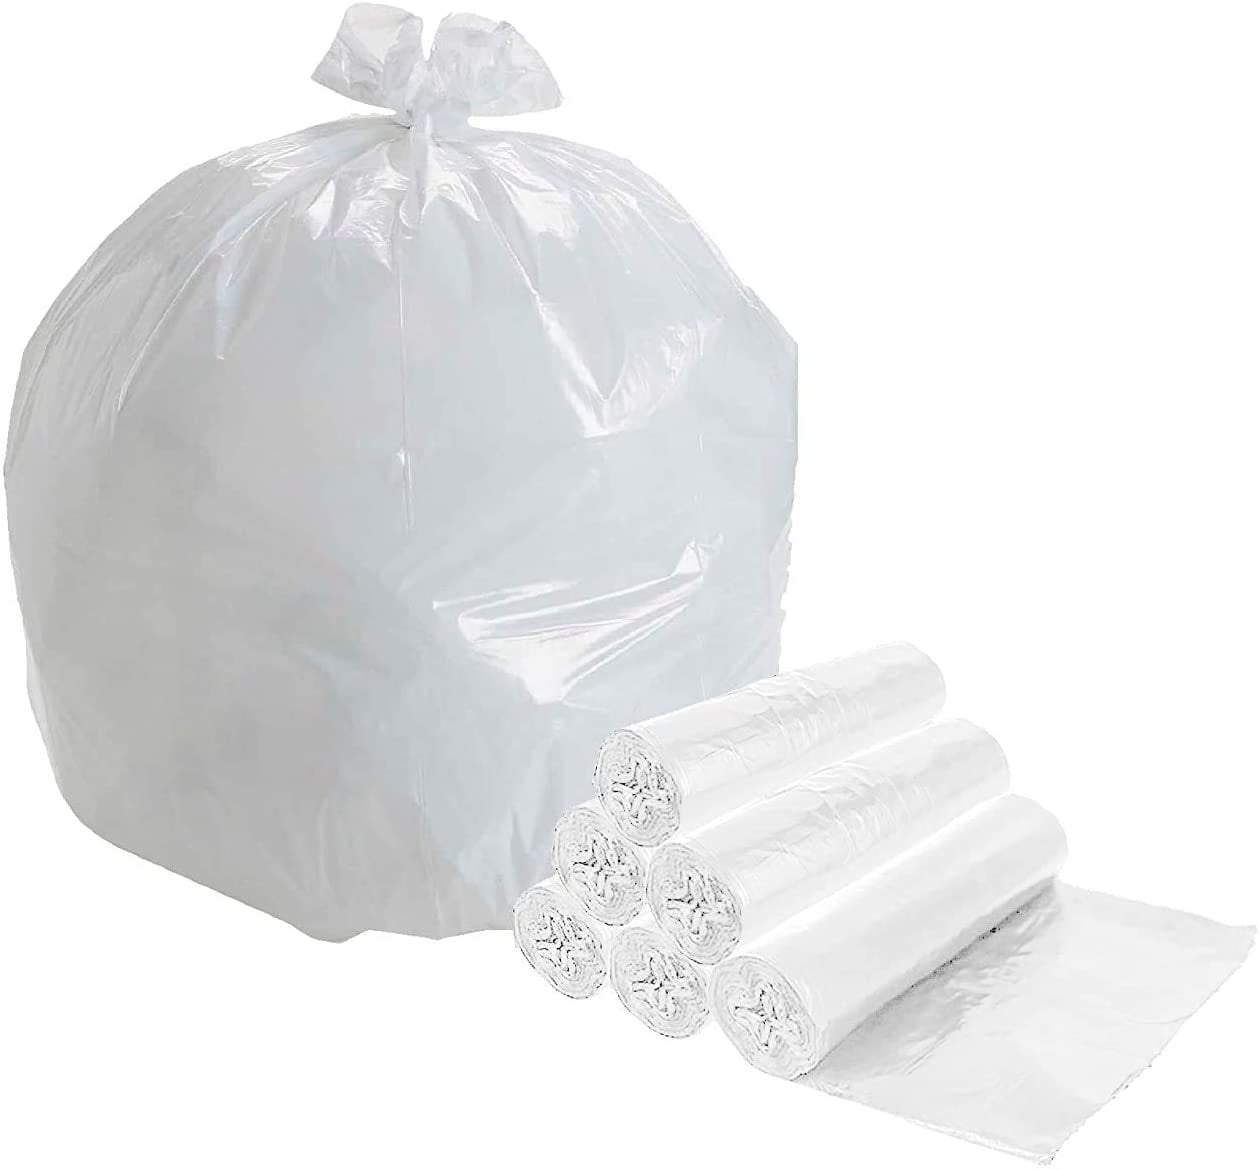 Pack of 1000 Premium HDPE Natural coreless Rolls 8 Micron 24 Width x 24 Length Trash Can Liners 7-10 Gallon 